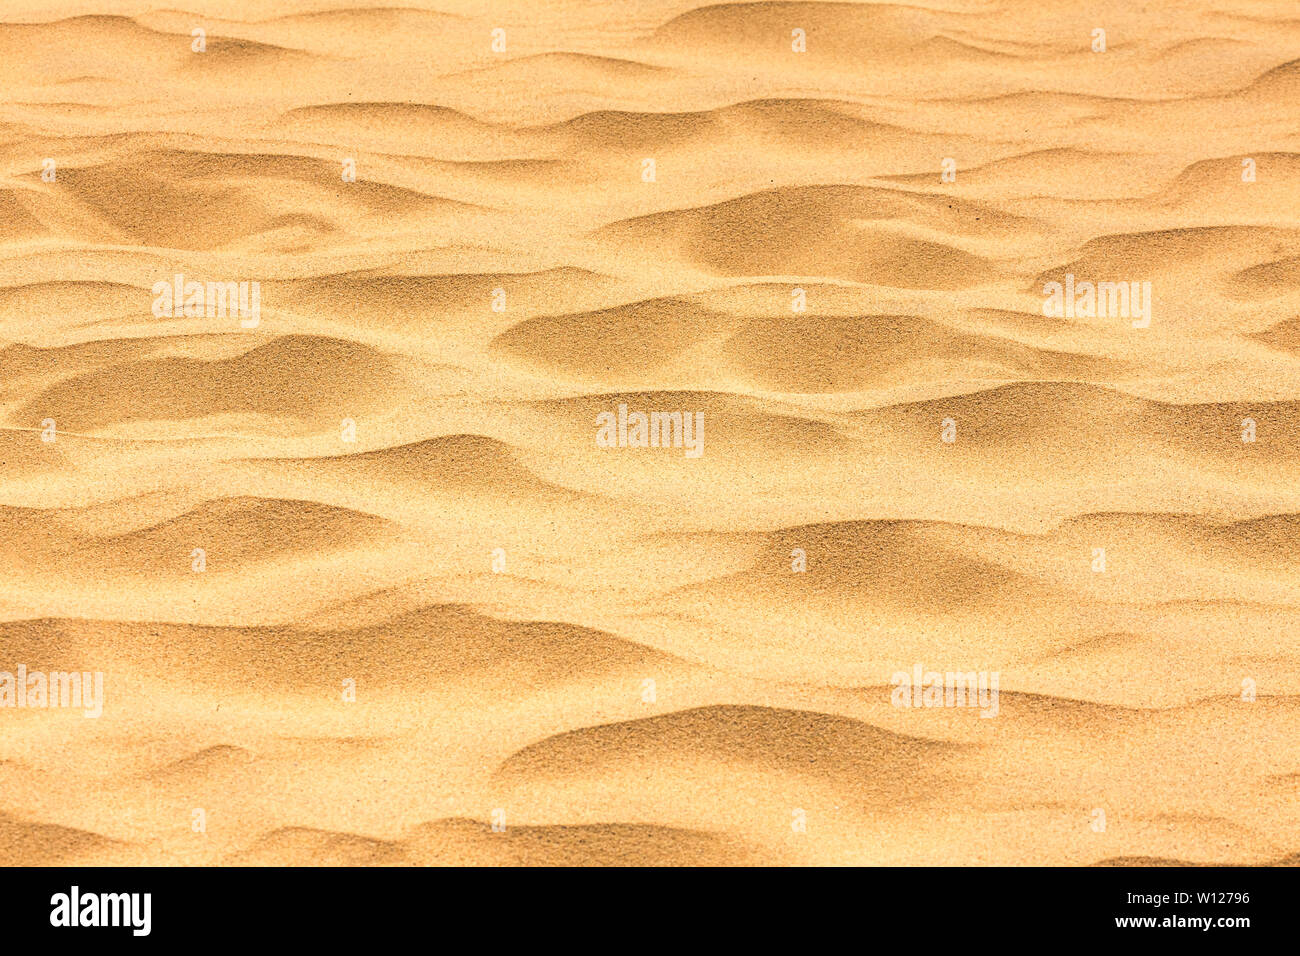 Background Image Of Desert Sand In The Dunes Stock Photo Alamy